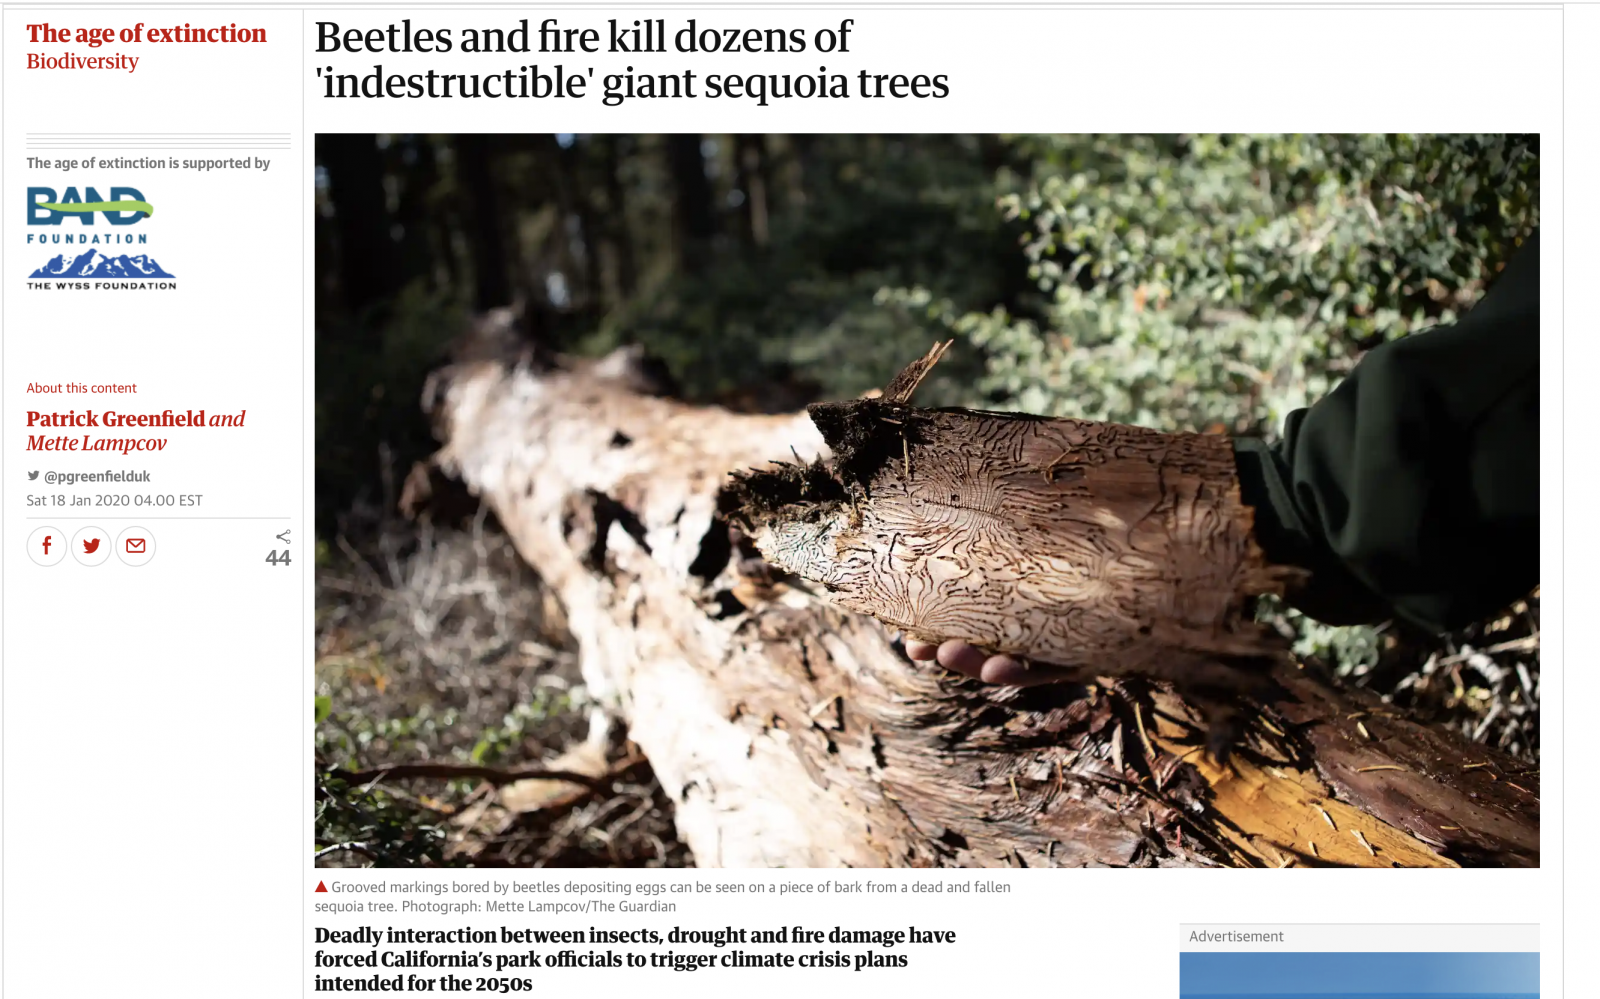 Thumbnail of Beetles and fire kill dozens of 'indestructible' giant sequoia trees